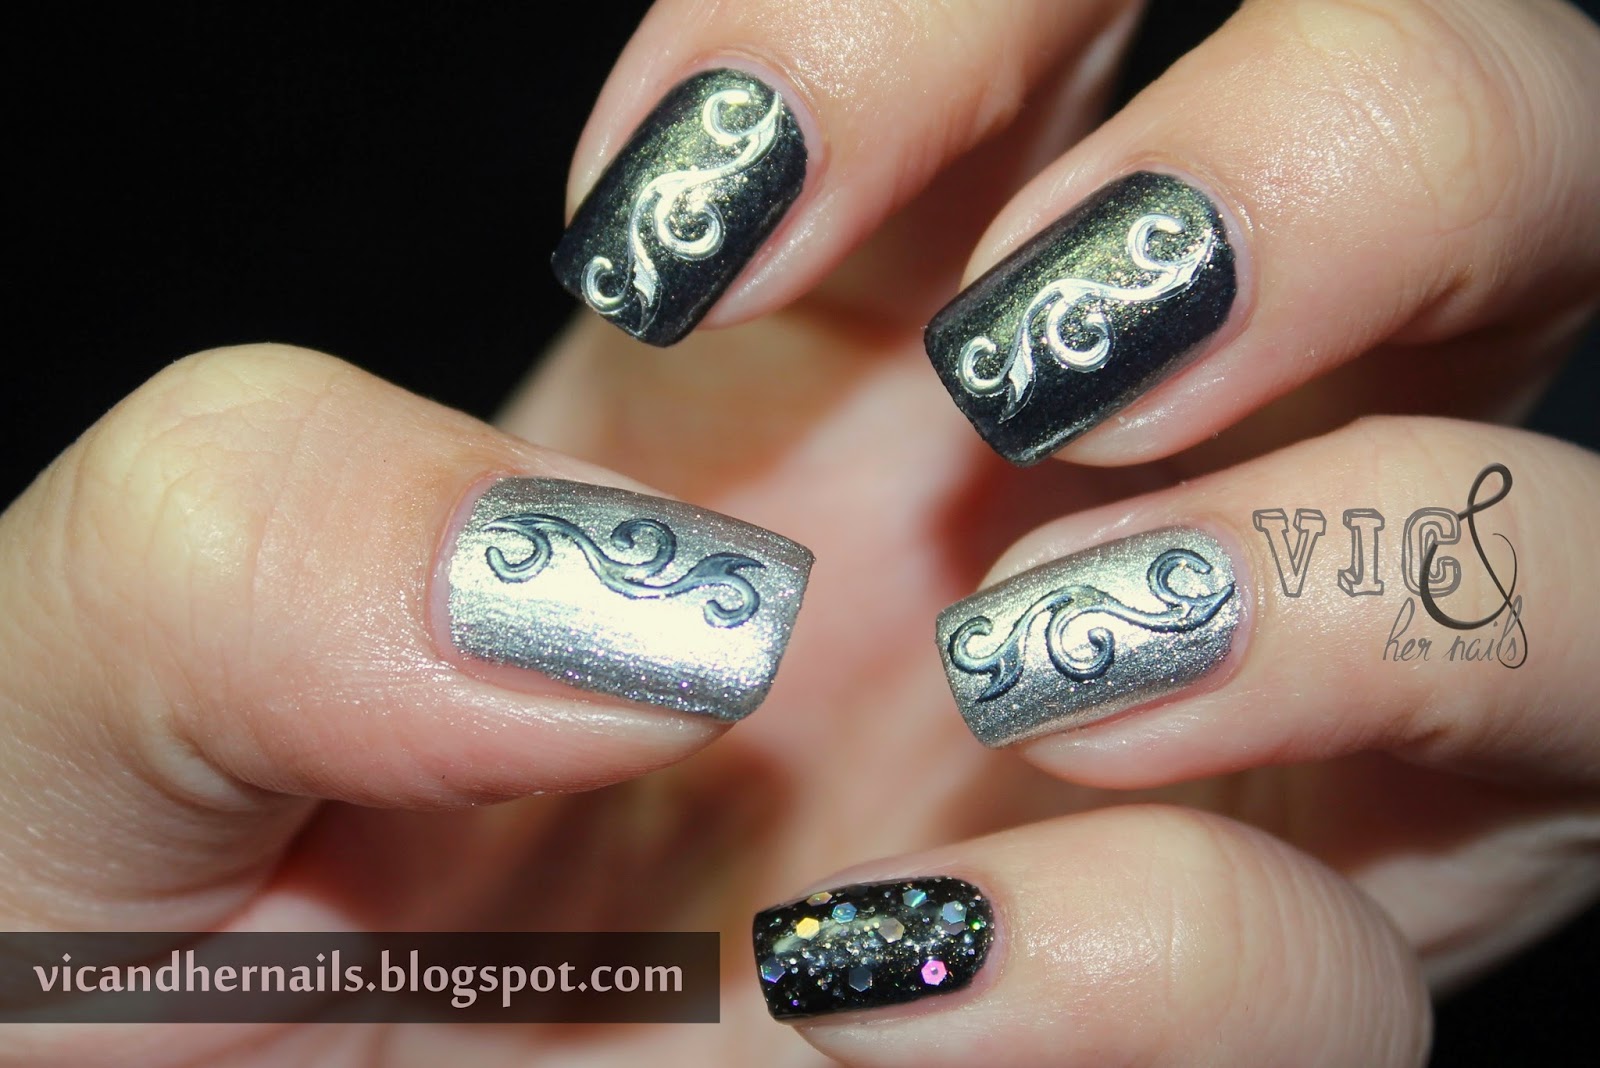 1. 3D Nail Art Stickers - wide 8